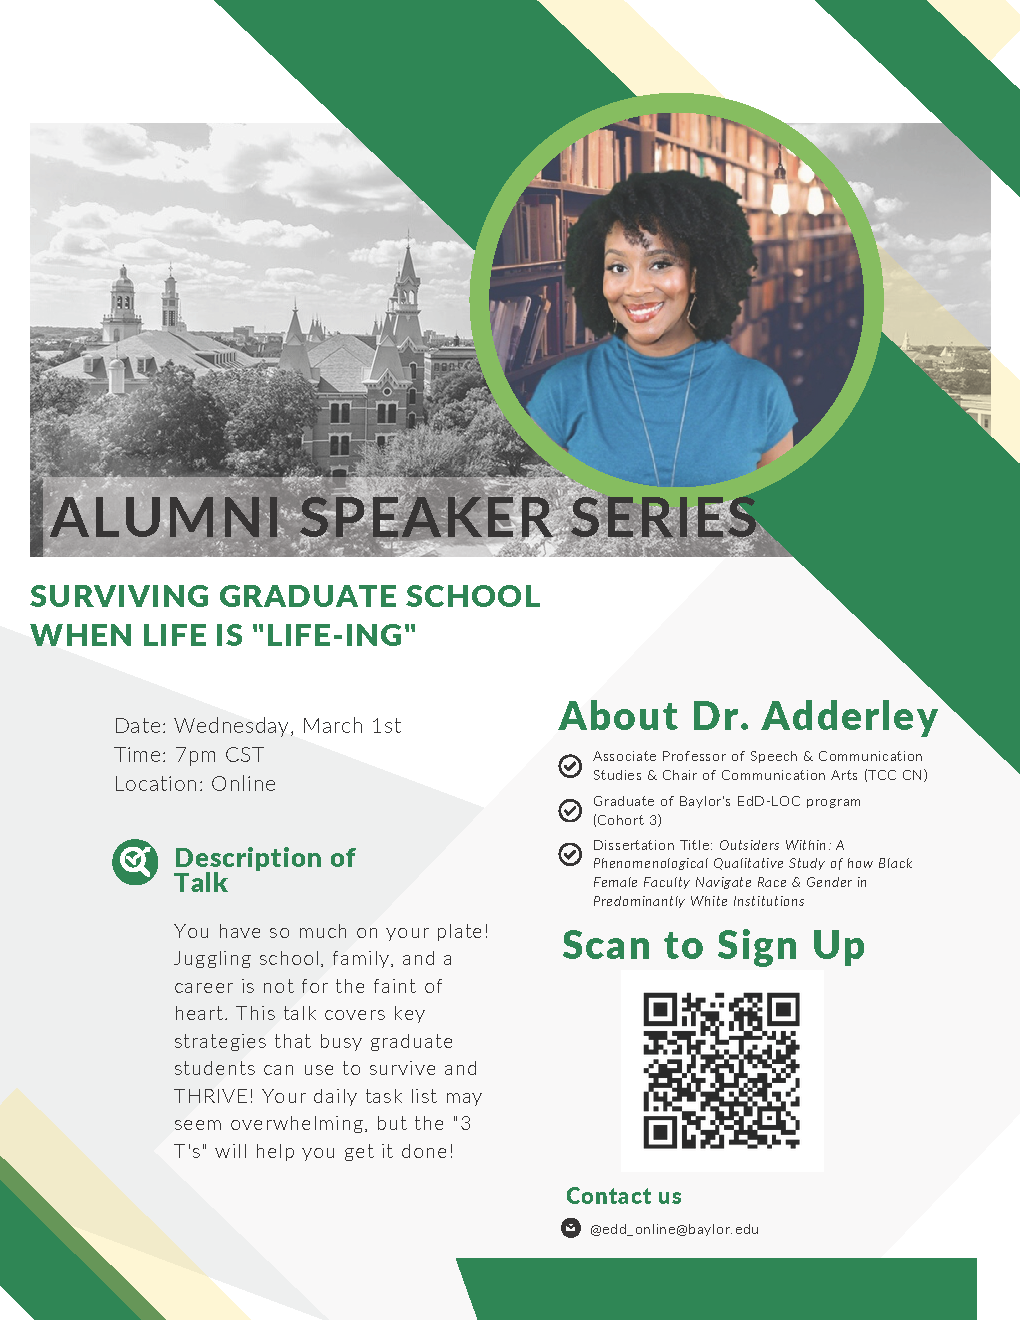 Alumni Speaker Series. Surviving Graduate School When Life Is “Life-ing”. You have so much on your plate! Juggling school, family, and a career is not for the faint of heart. This talk covers key strategies that busy graduate students can use to survive and THRIVE! Your daily task list may seem overwhelming, but the “3 T’s” will help you get it done! Dr. Adderley is an Associate Professor of Speech & Community Studies & Chair of Communication Arts (TCC CN). She graduated from Baylor’s EdD-LOC program (Cohort 3). Her Dissertation title was “Outsiders Within: A Phenomenological Qualitative Study of How Black Female Faculty Navigate Race & Gender in Predominantly White Institutions”. March 2nd, 7 p, CST, Online. Scan to Sign Up. Contact us @edd_online@baylor.edu